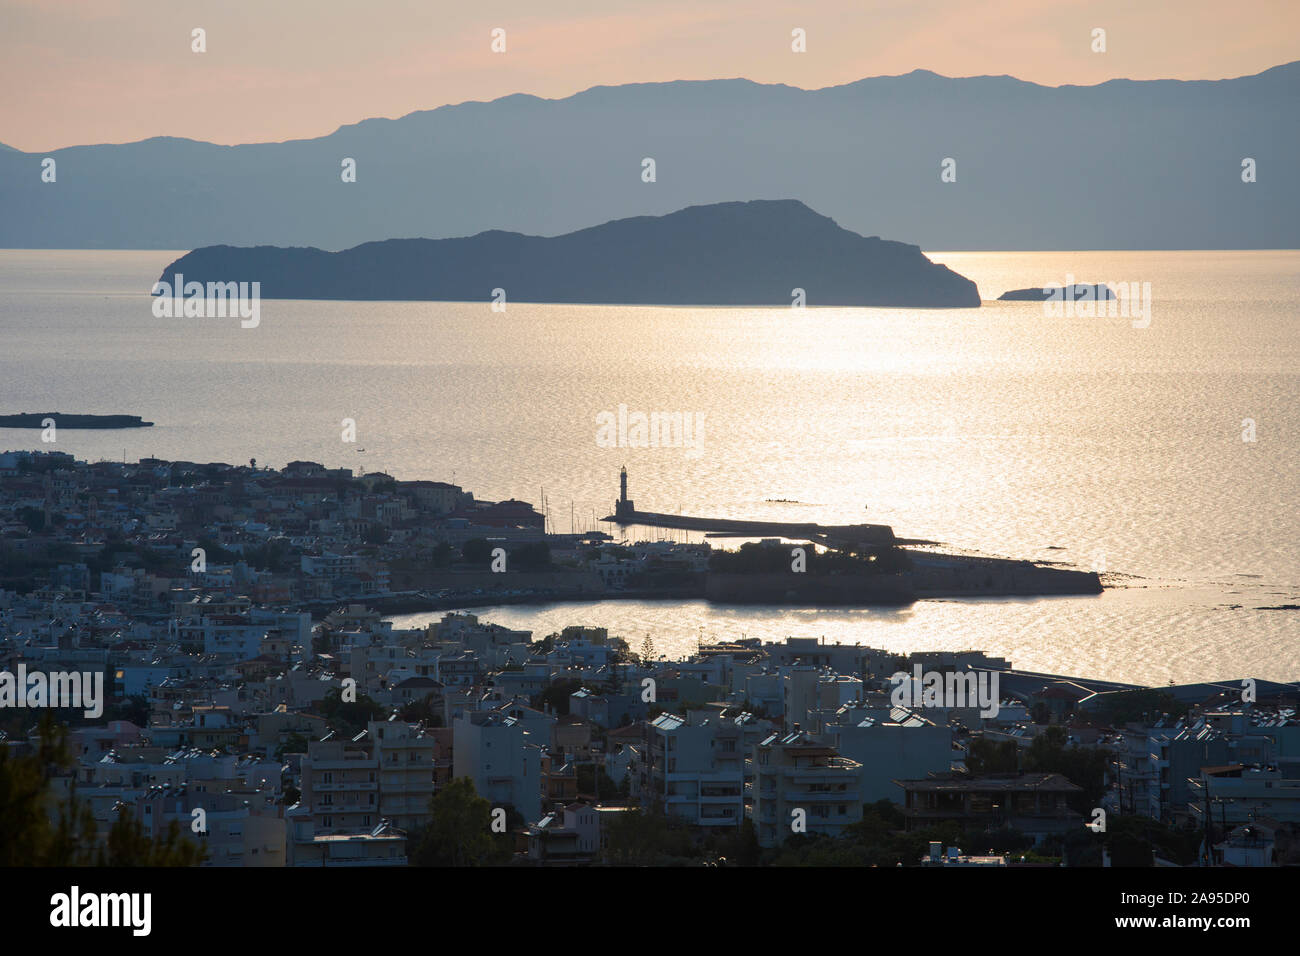 Chania, Crete, Greece. Backlit view over the city and Gulf of Chania, evening, the island of Agii Theodori prominent. Stock Photo